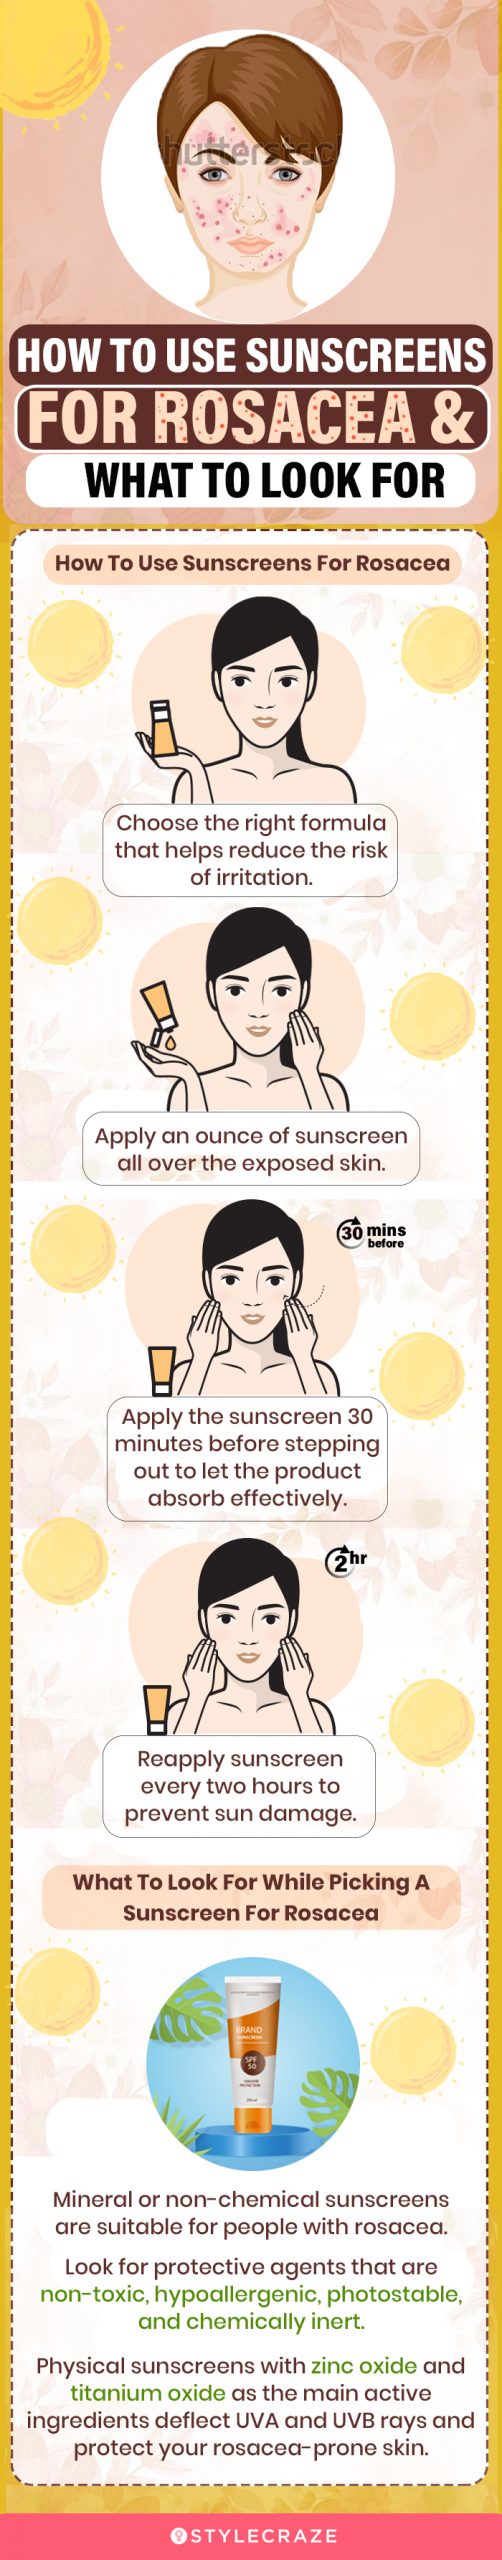 How To Use Sunscreens For Rosacea & What To Look For (infographic)